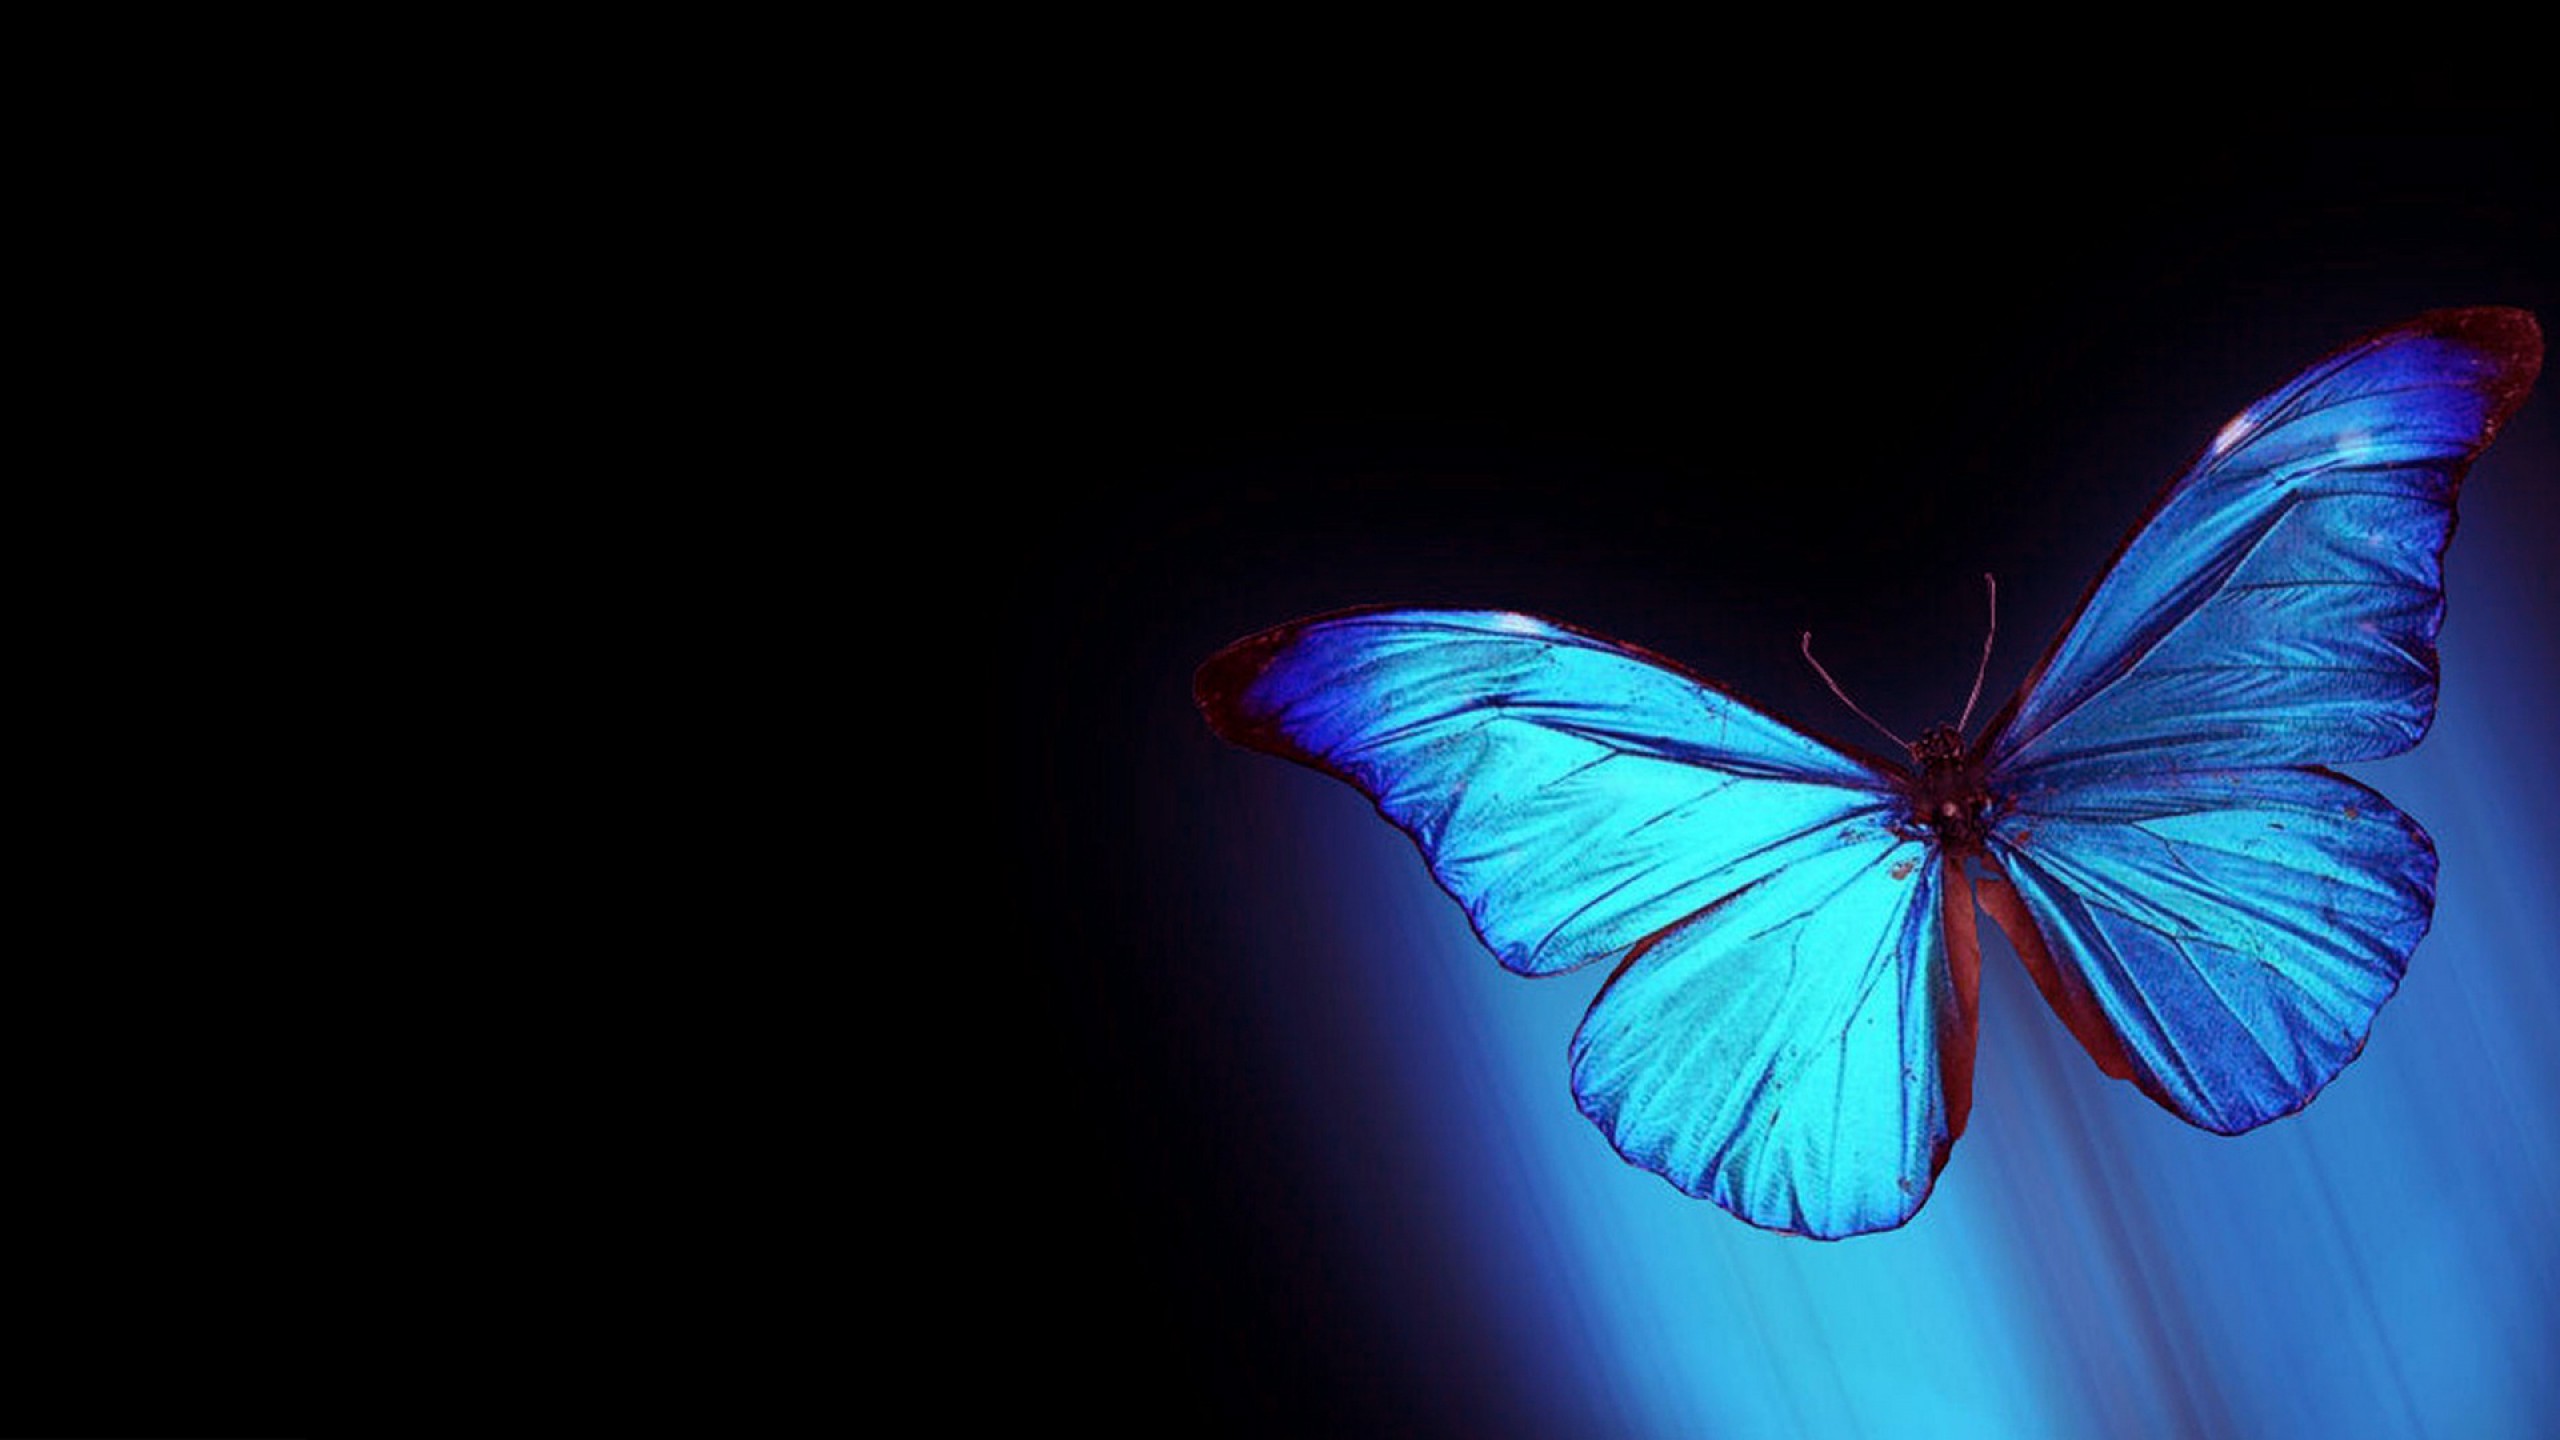 And Blue Butterfly Wallpaper In High Resolution At Animals